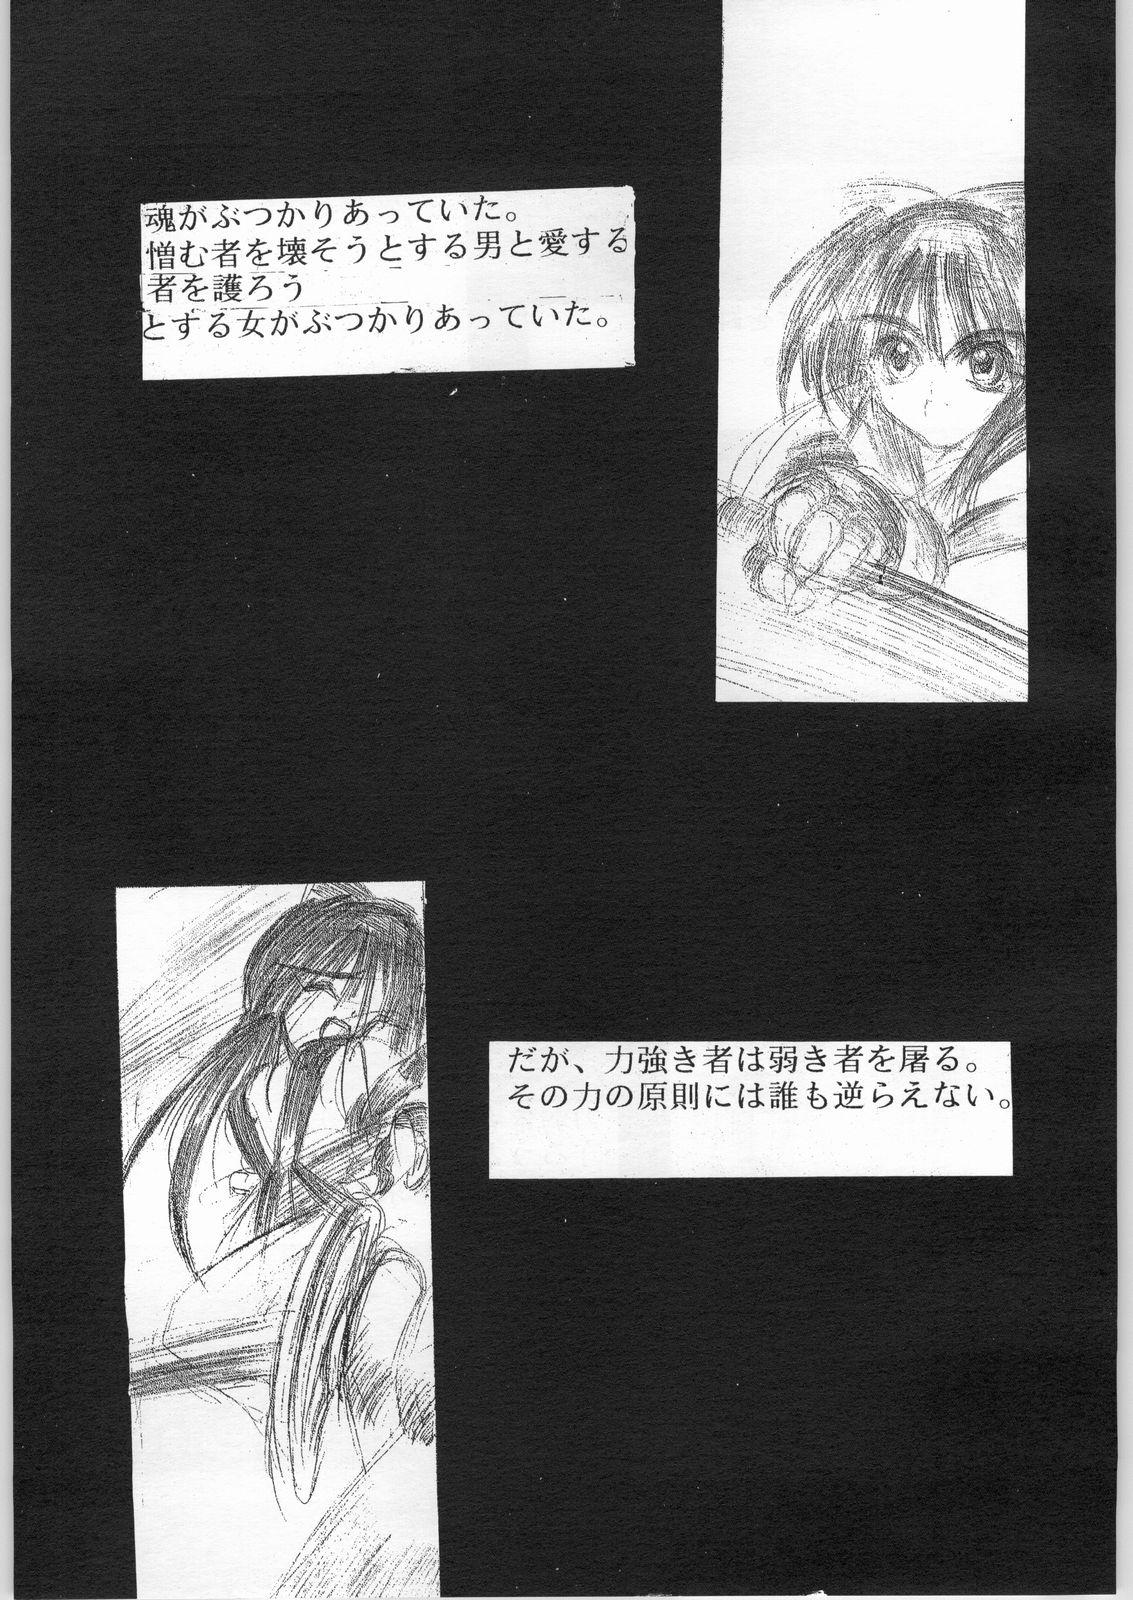 Oldyoung R-Works 1st Book - Samurai spirits Exhib - Page 12